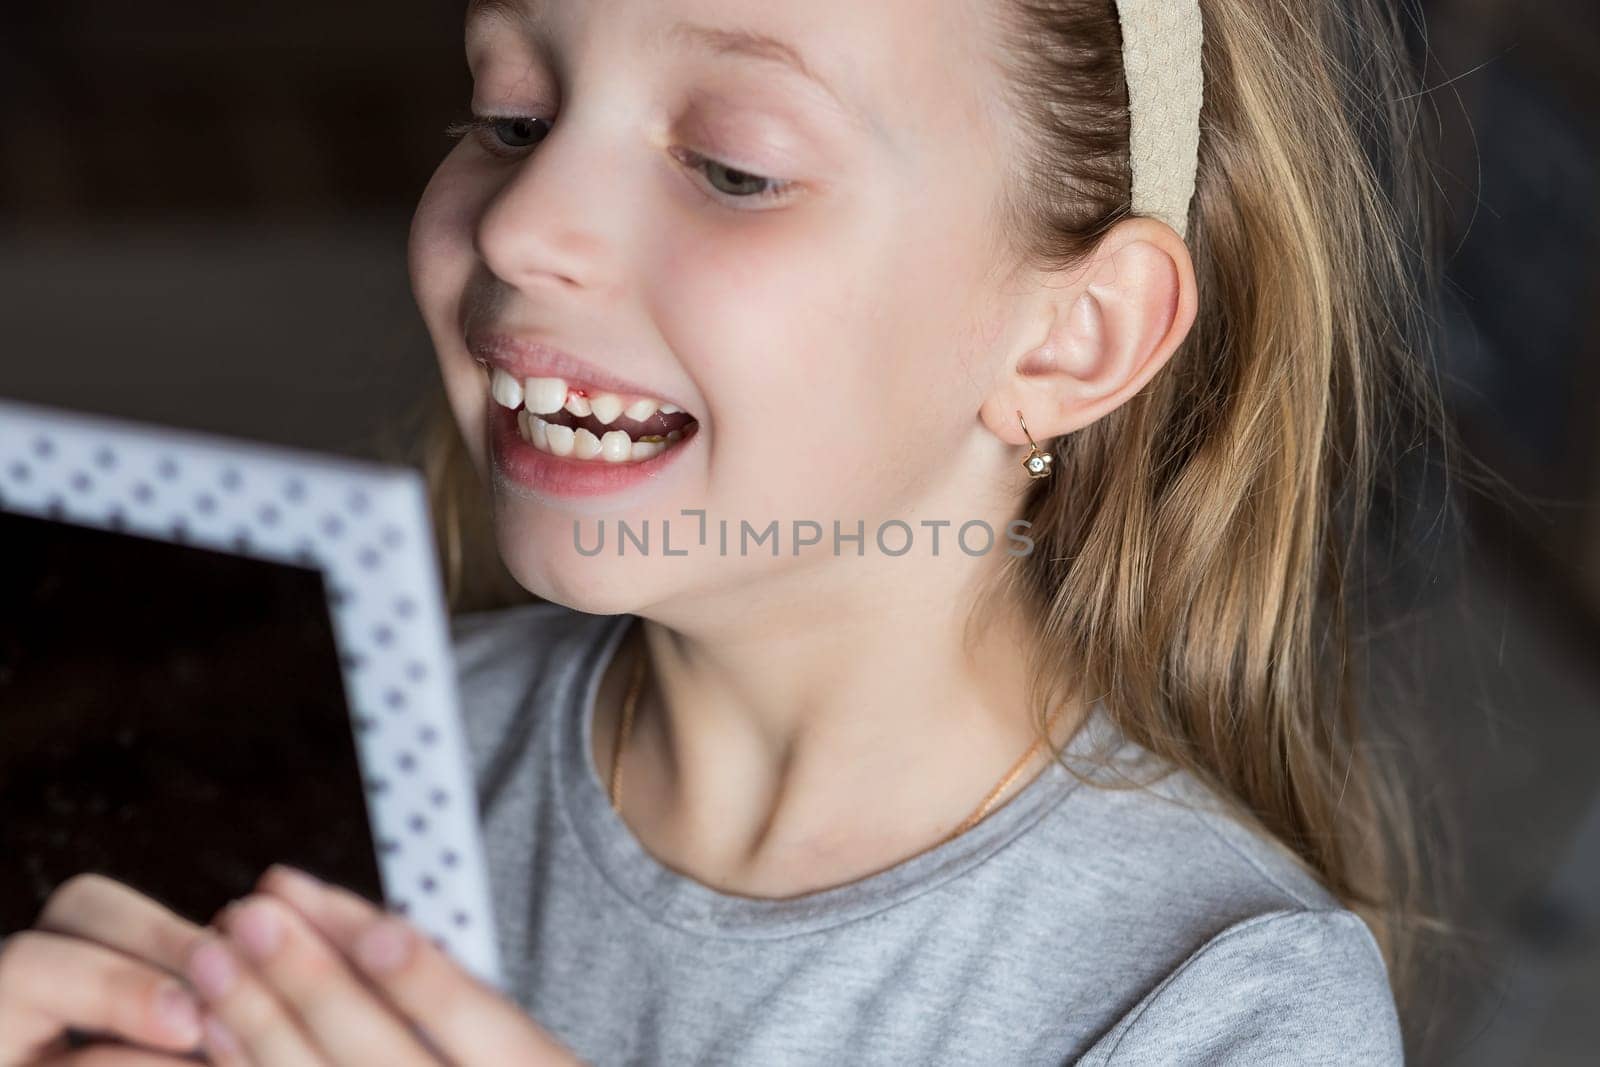 Female kid with opened mouth pointing at missing front baby tooth with finger smiling excitedly in yellow t-shirt on white background.